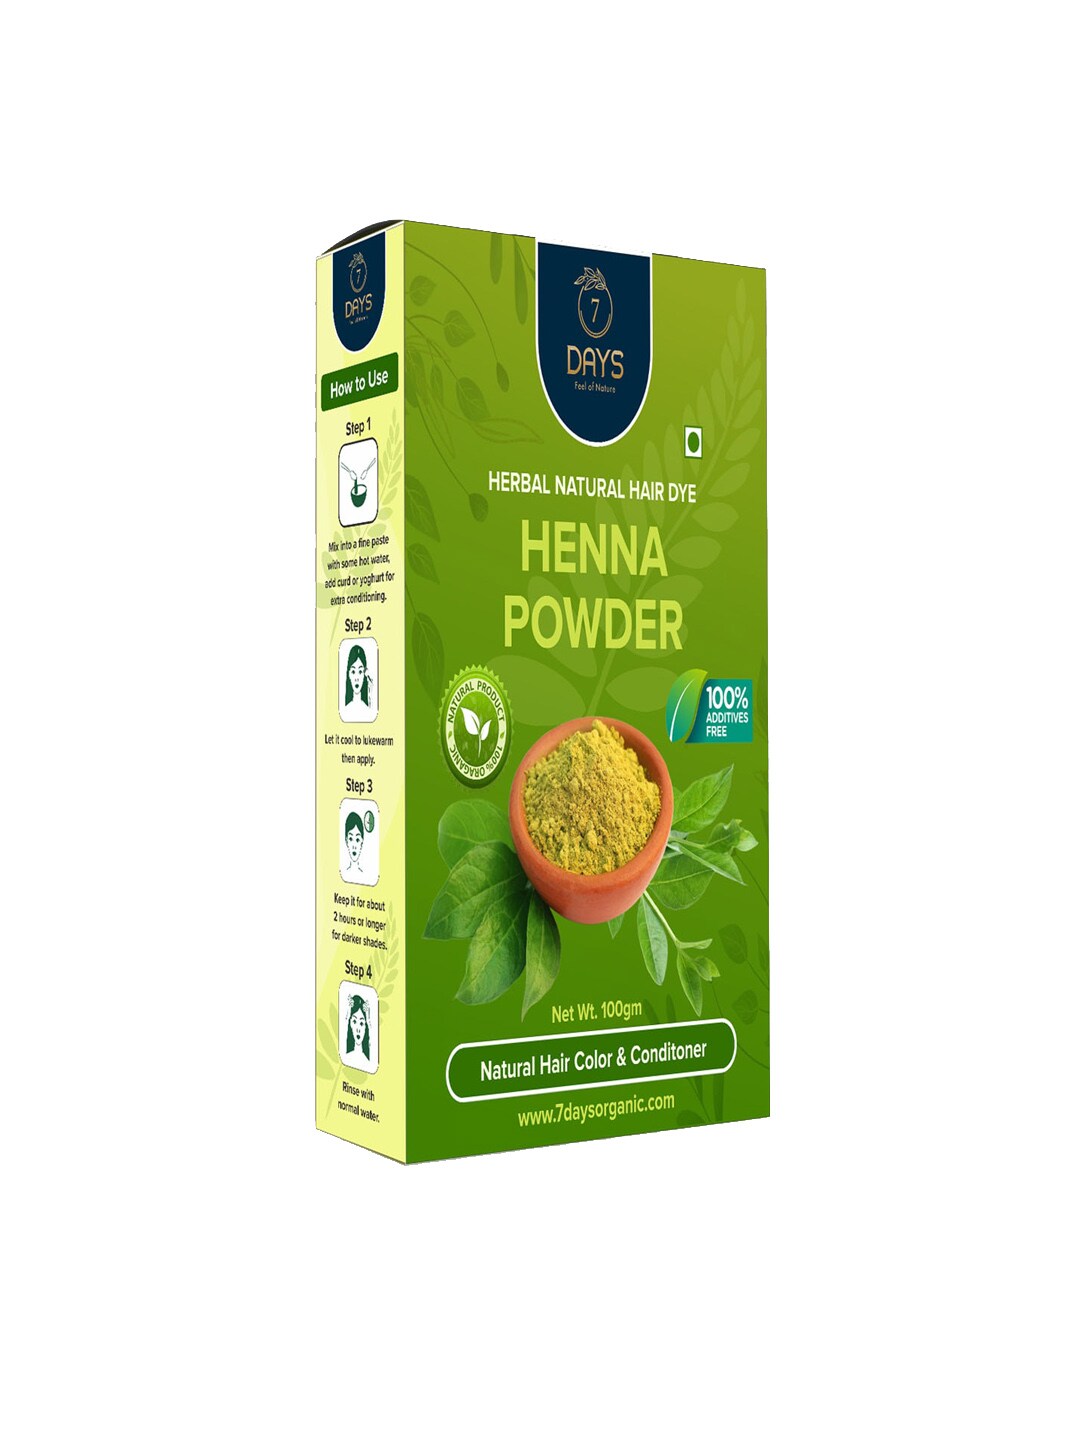 7 DAYS Herbal Natural Hair Dye Henna Powder for Natural Colour & Conditioner - 100 g Price in India